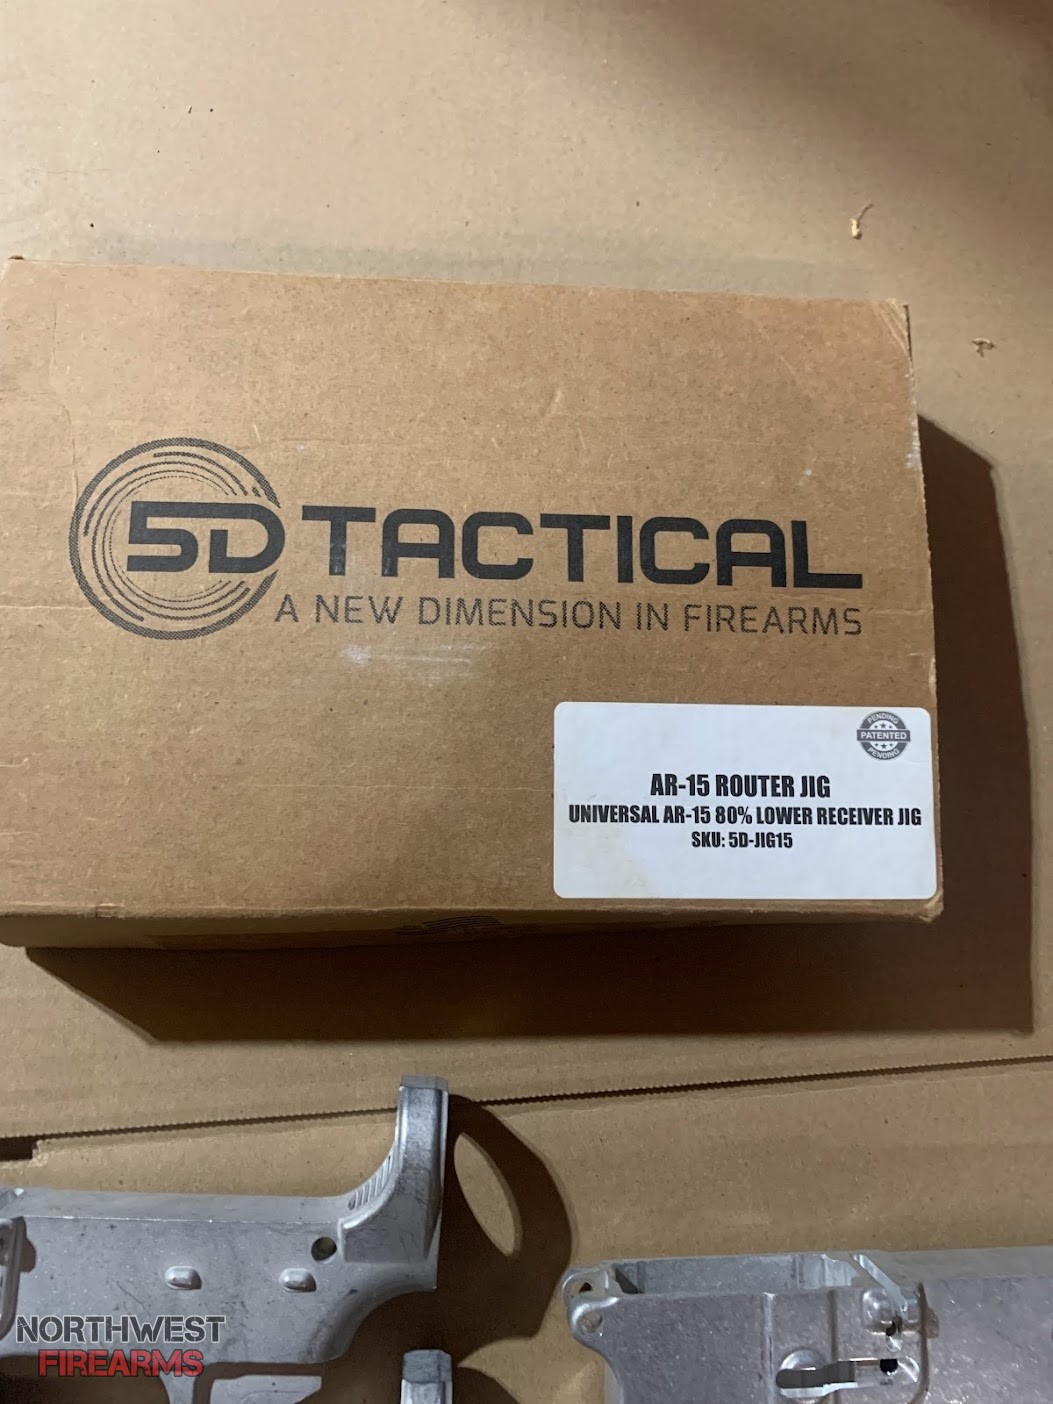 Brand New 5d Tactical AR-15 80% JIG + Tools + 5 80% Lowers + Skeleton Grip